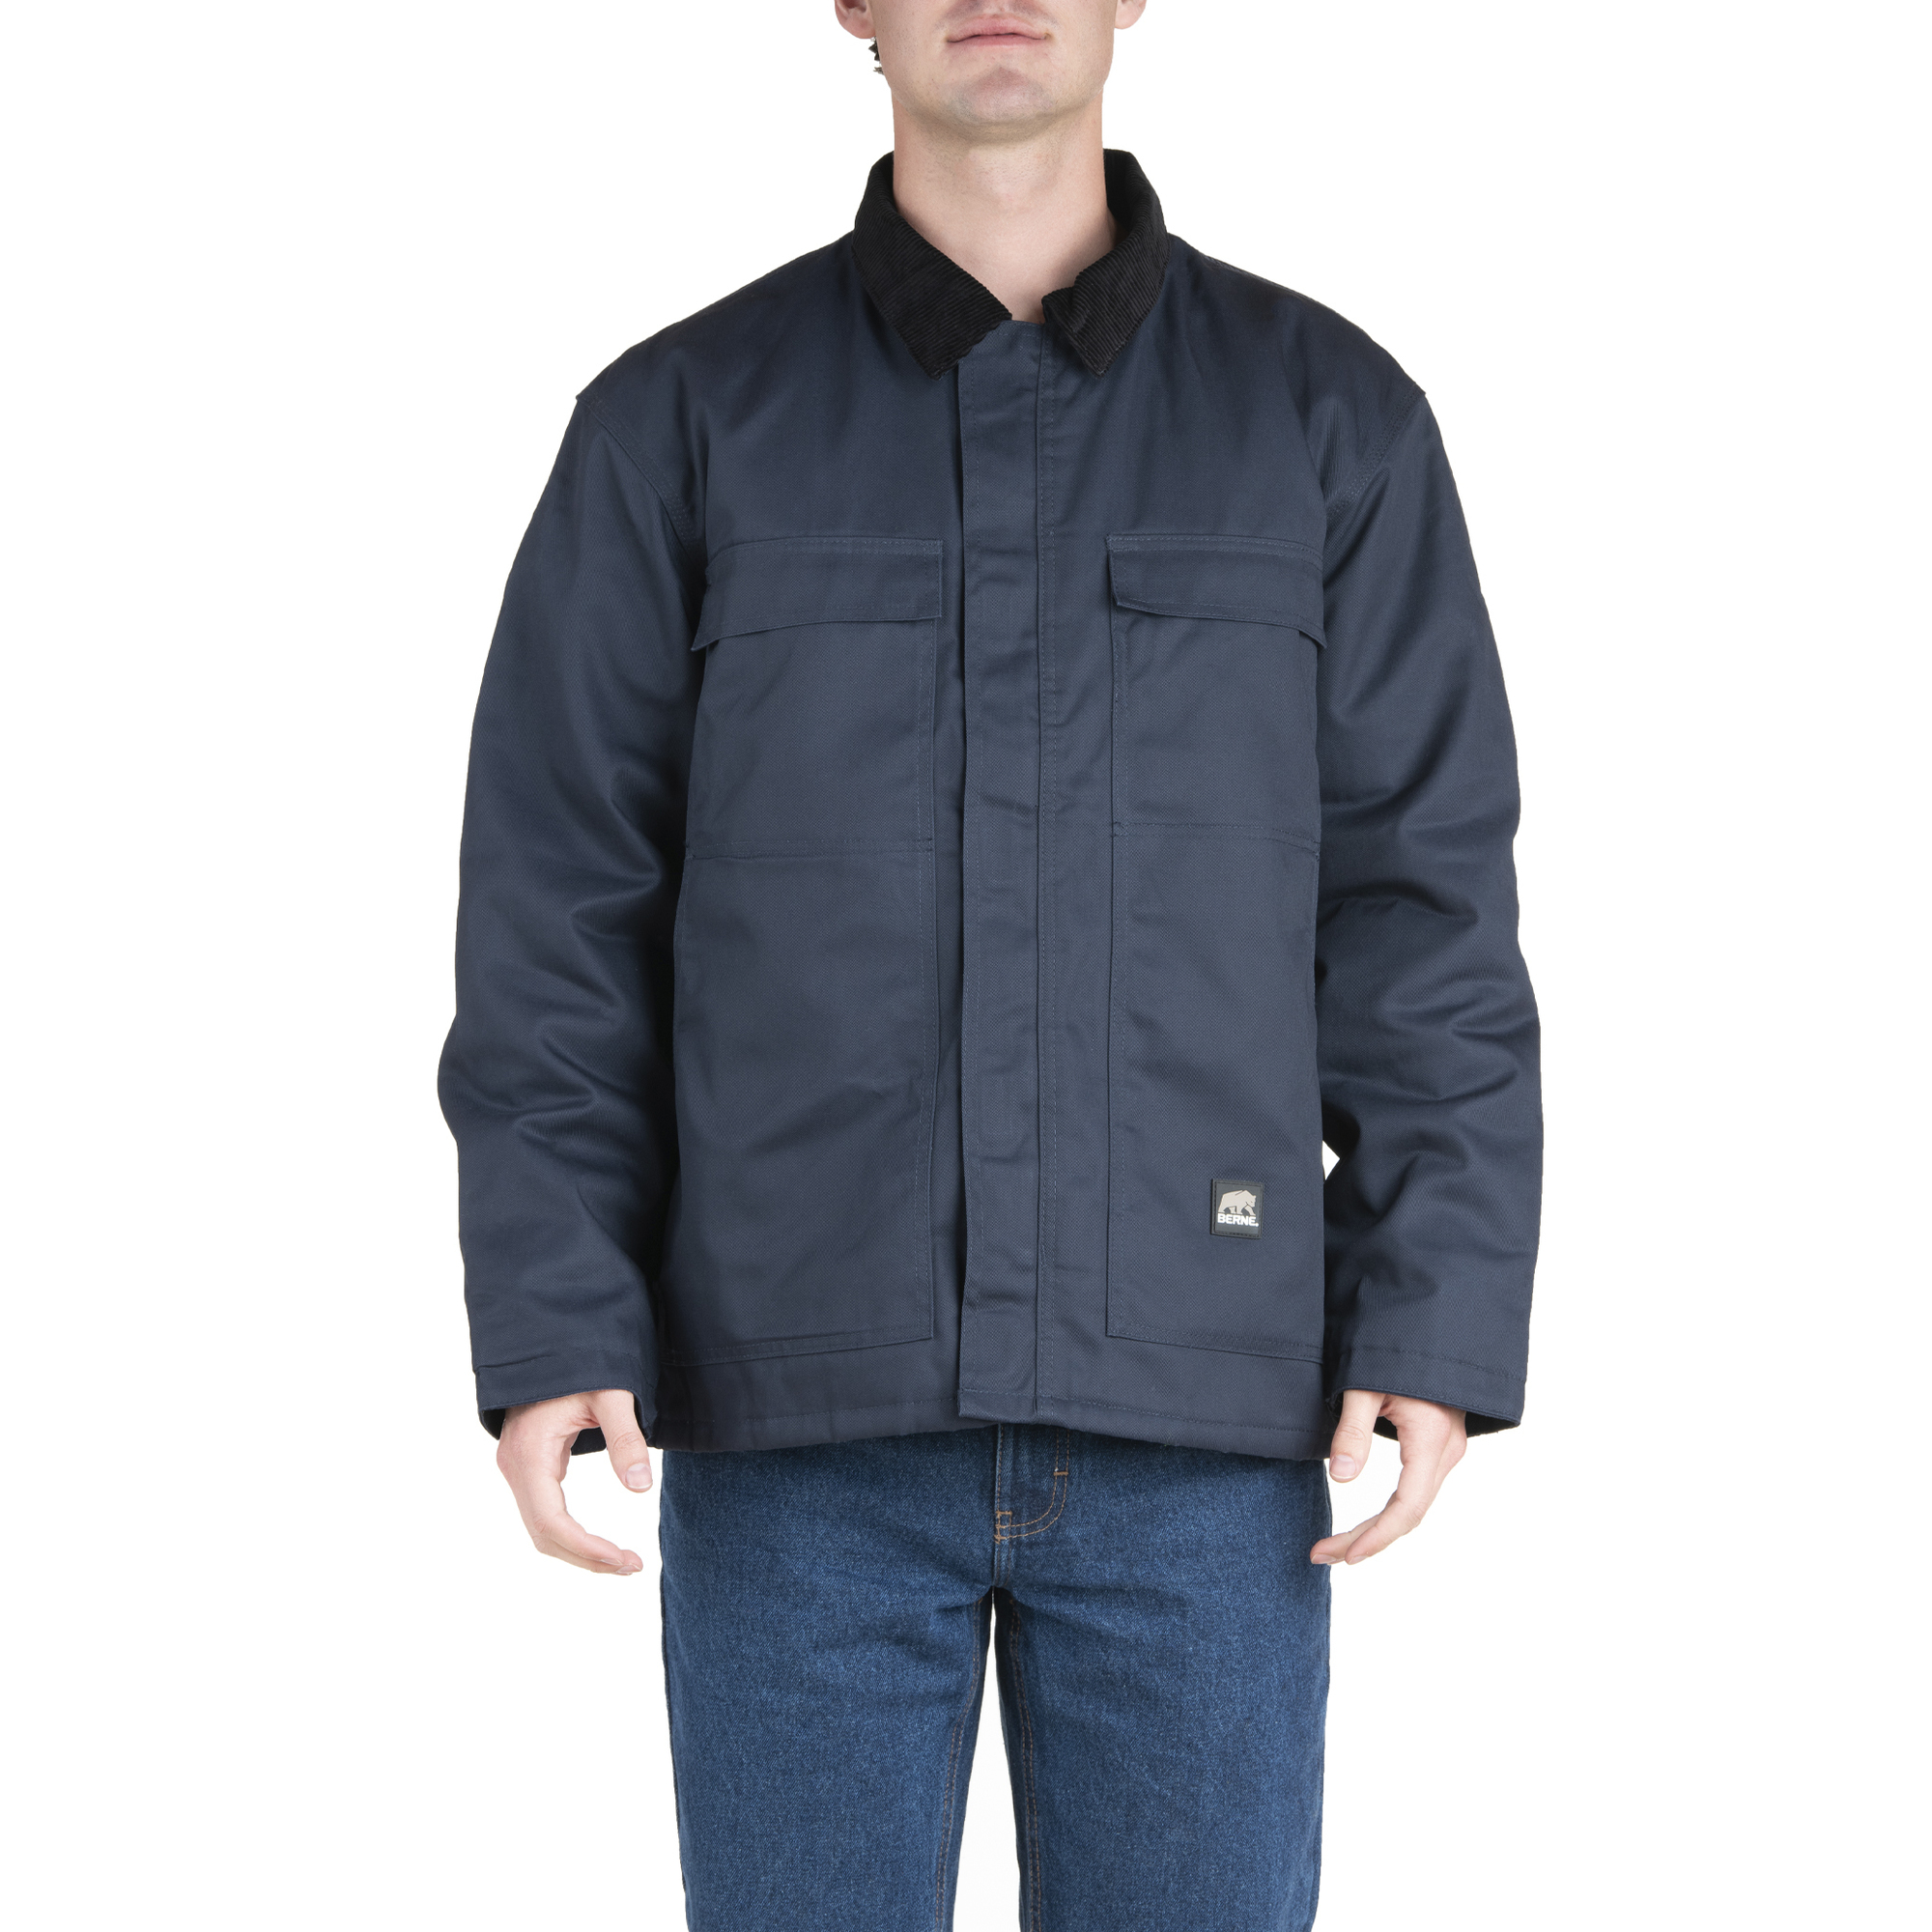 Berne Apparel, Heritage Twill Chore Coat, Size M, Color Navy, Model CH414